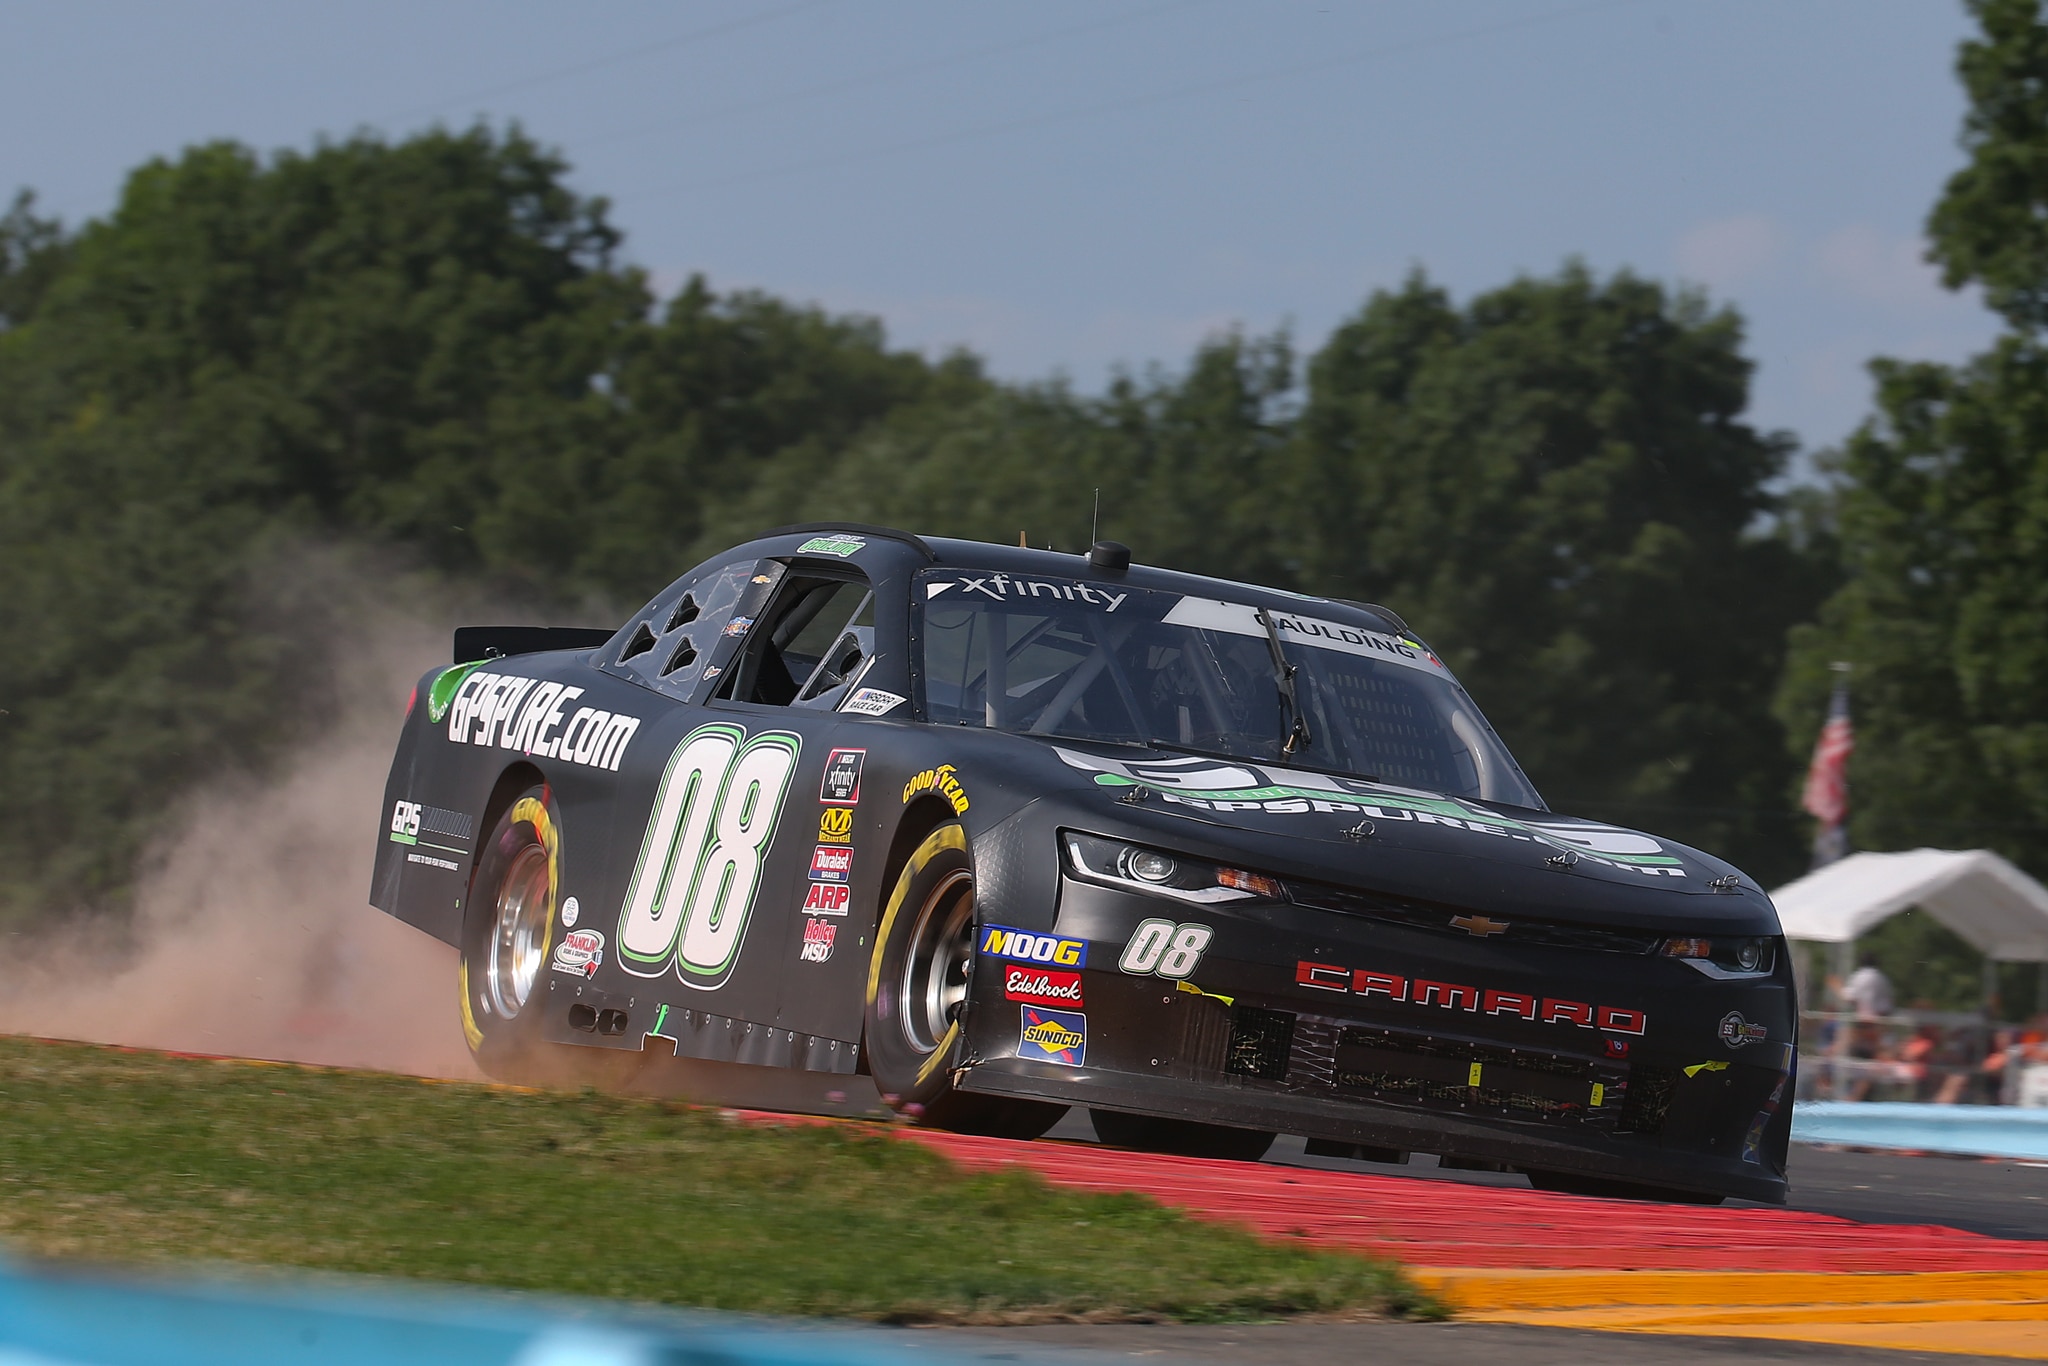 08 GPS Pure Chevrolet - Gray Gaulding Nascar Driver at Mid-Ohio